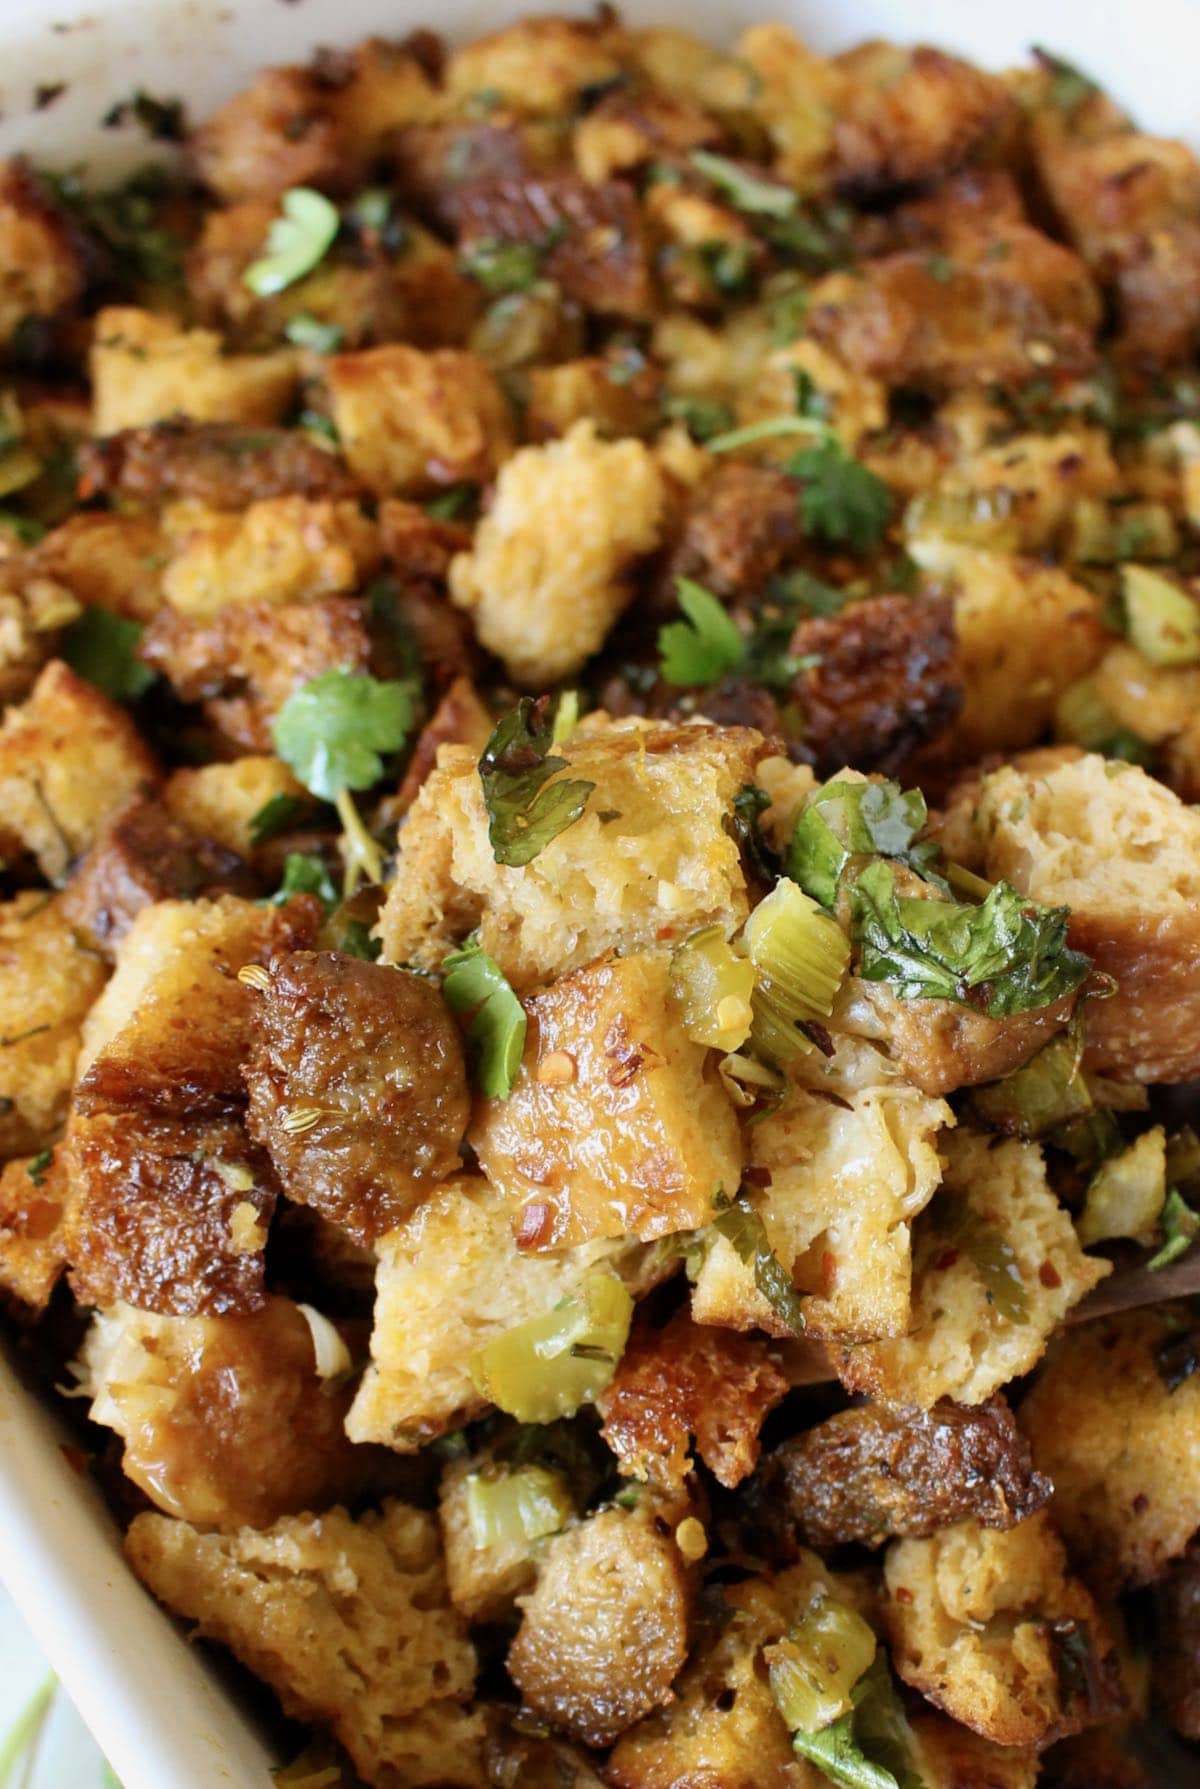 Vegetarian stuffing with leeks and meatless sausage